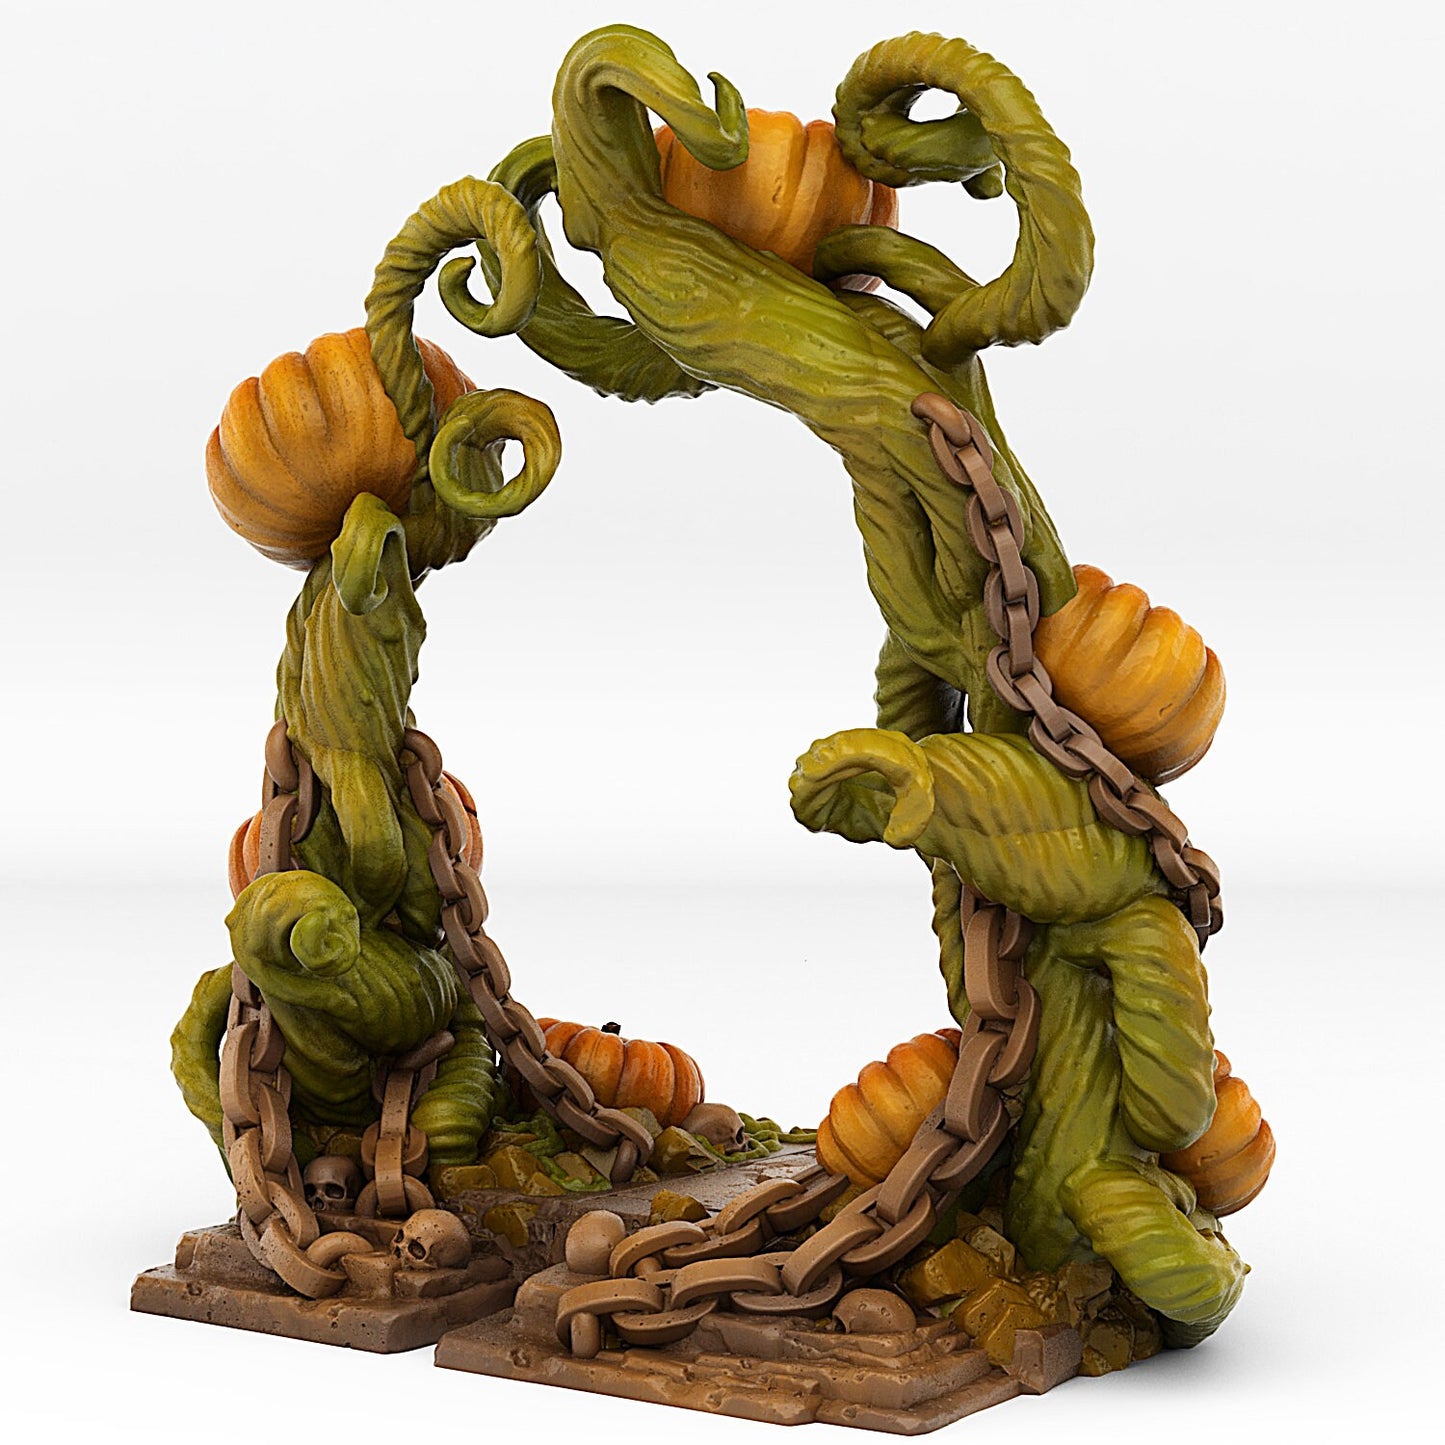 Pumpkin Portal | Scenery and terrain | 3D Printed Resin Miniature | Tabletop Role Playing | AoS | D&D | 40K | Pathfinder